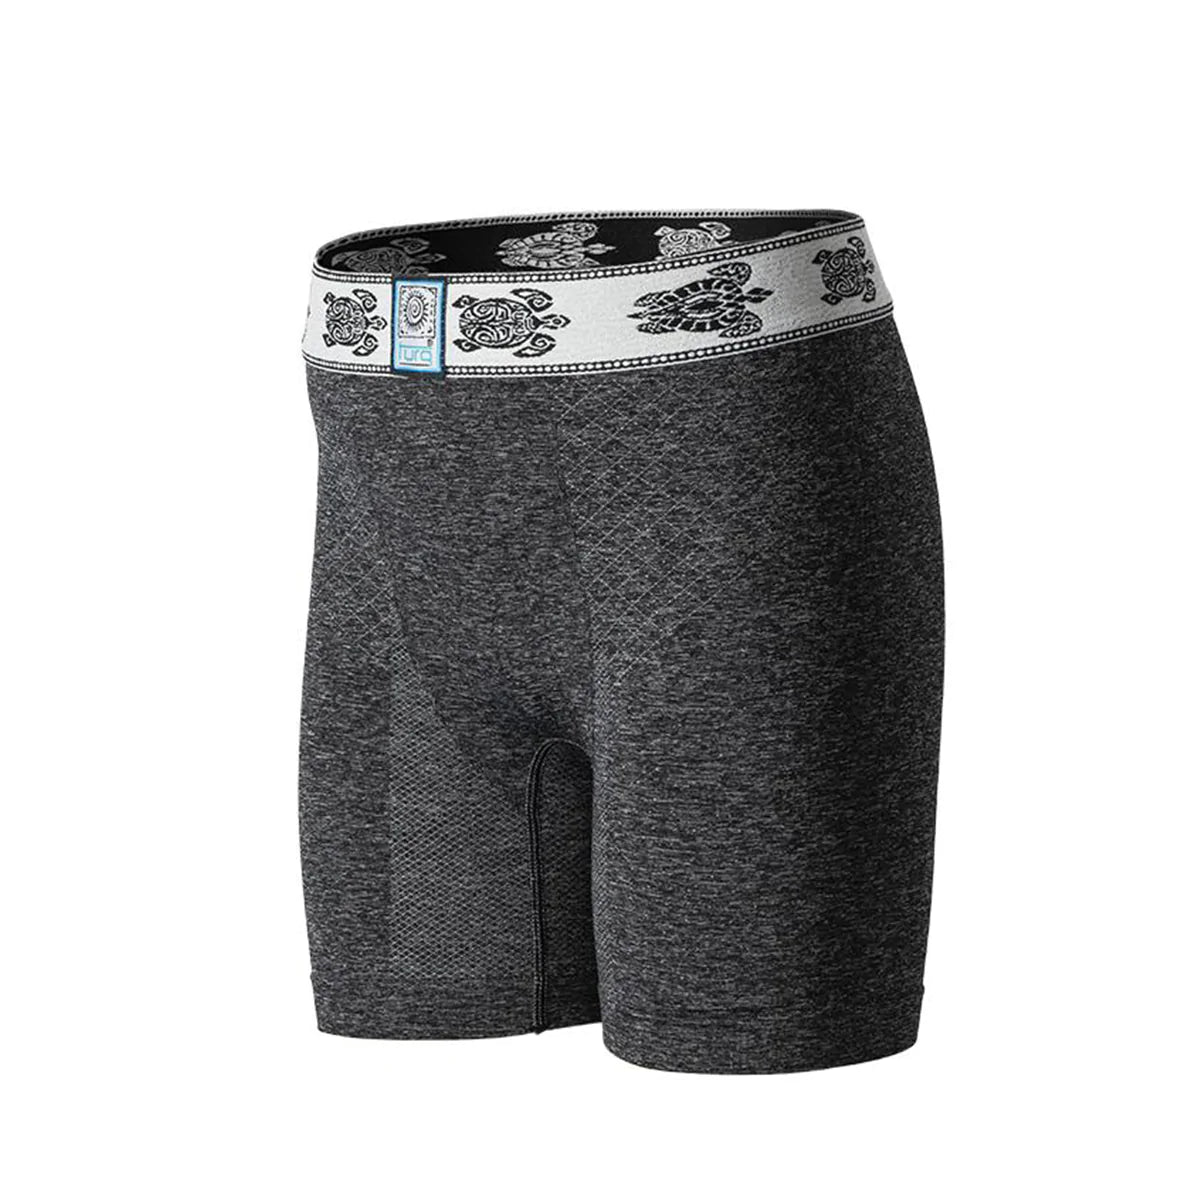 TURQ boxer briefs in crushed grey with a black and white embroidered turtle waistband